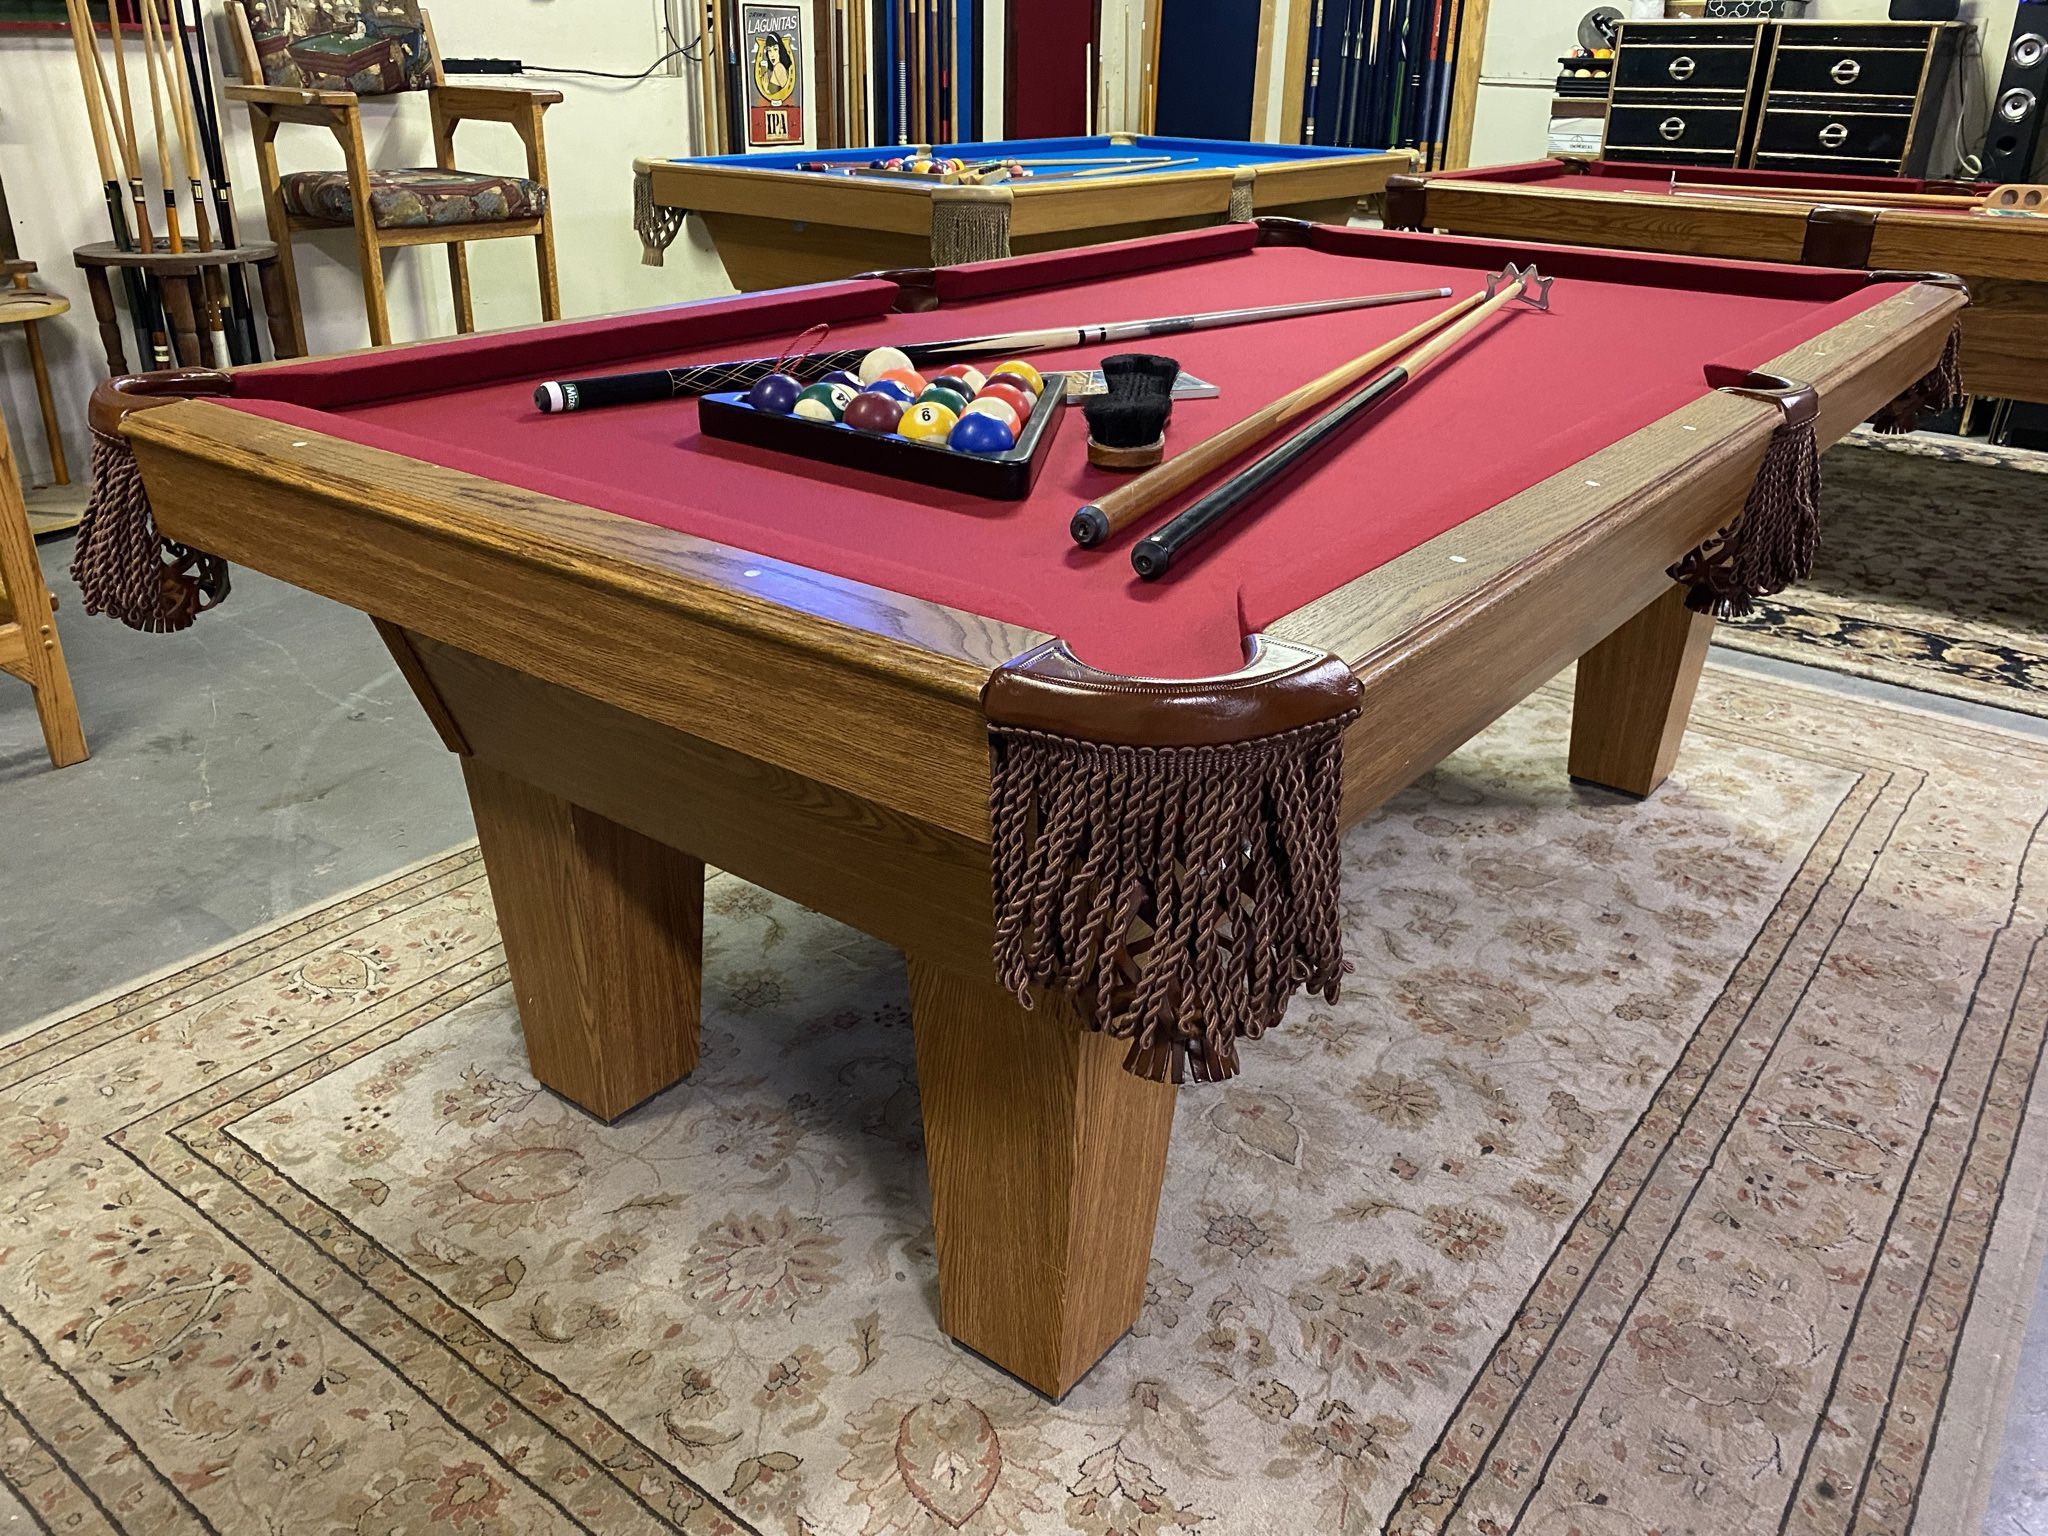 Elegant 7’ Olhausen Pool Table - Brand New - Can Deliver!